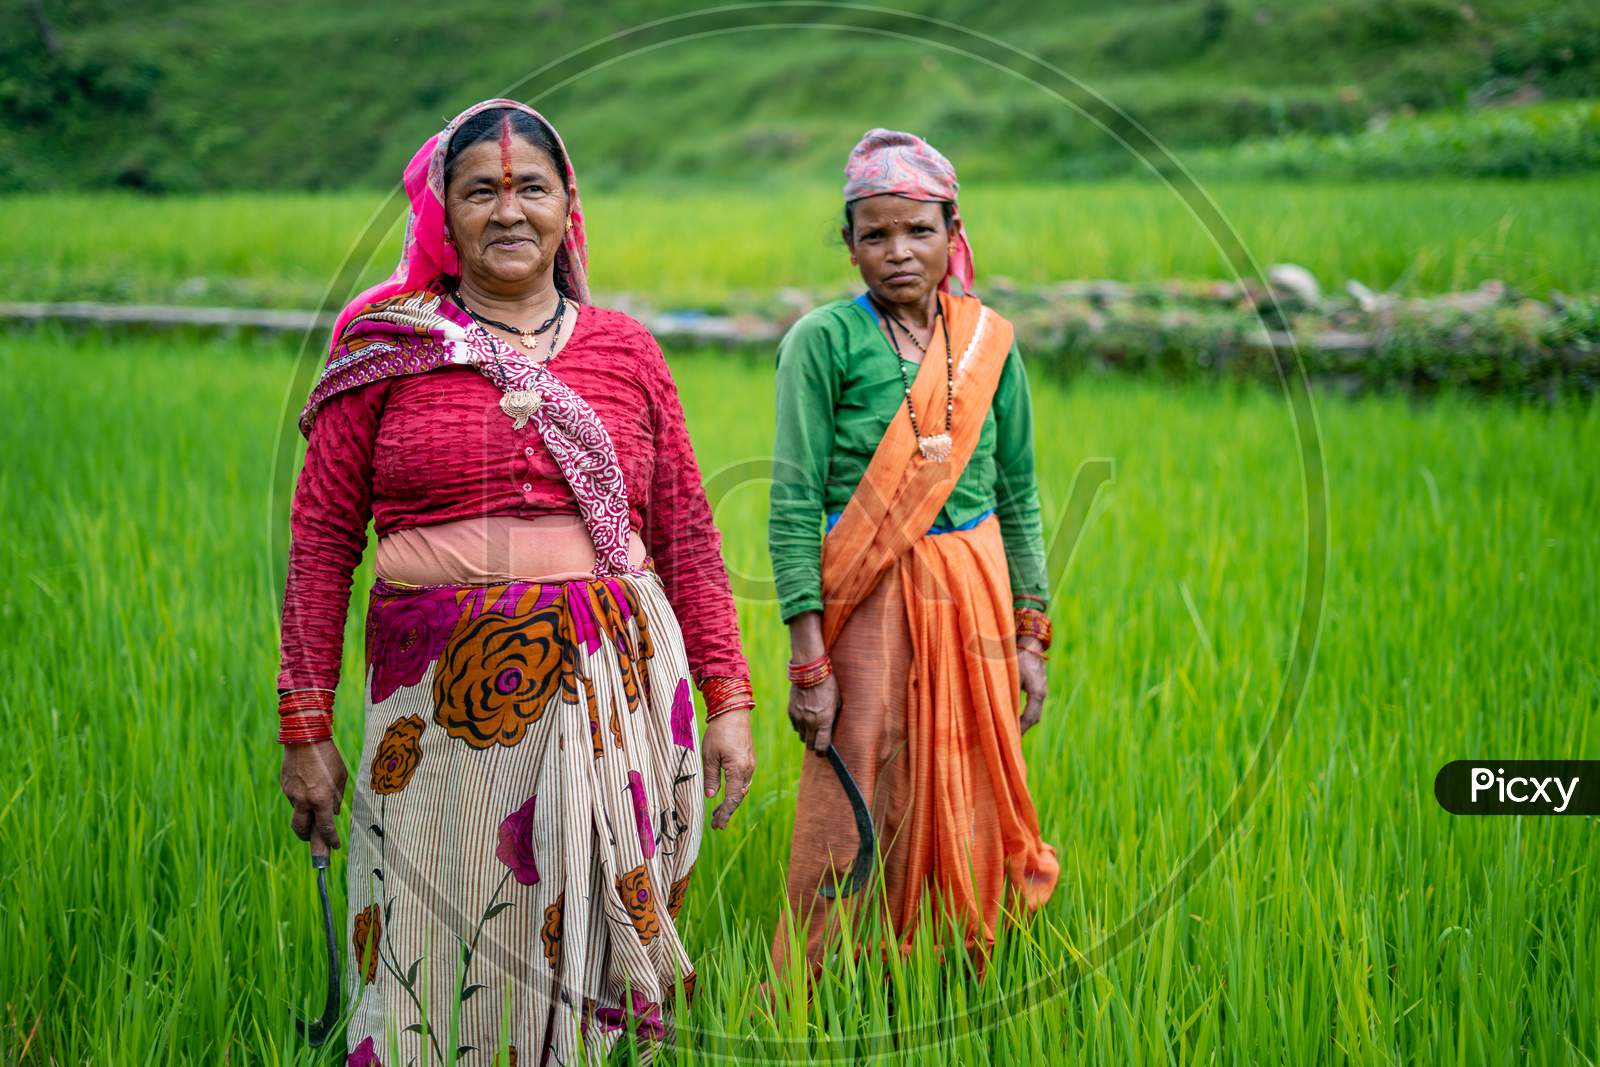 Almora, India - September 15, 2020: Old Indian Woman Farmers Standing In Working In The Green Fields, Smiling And Looking Into The Camera.